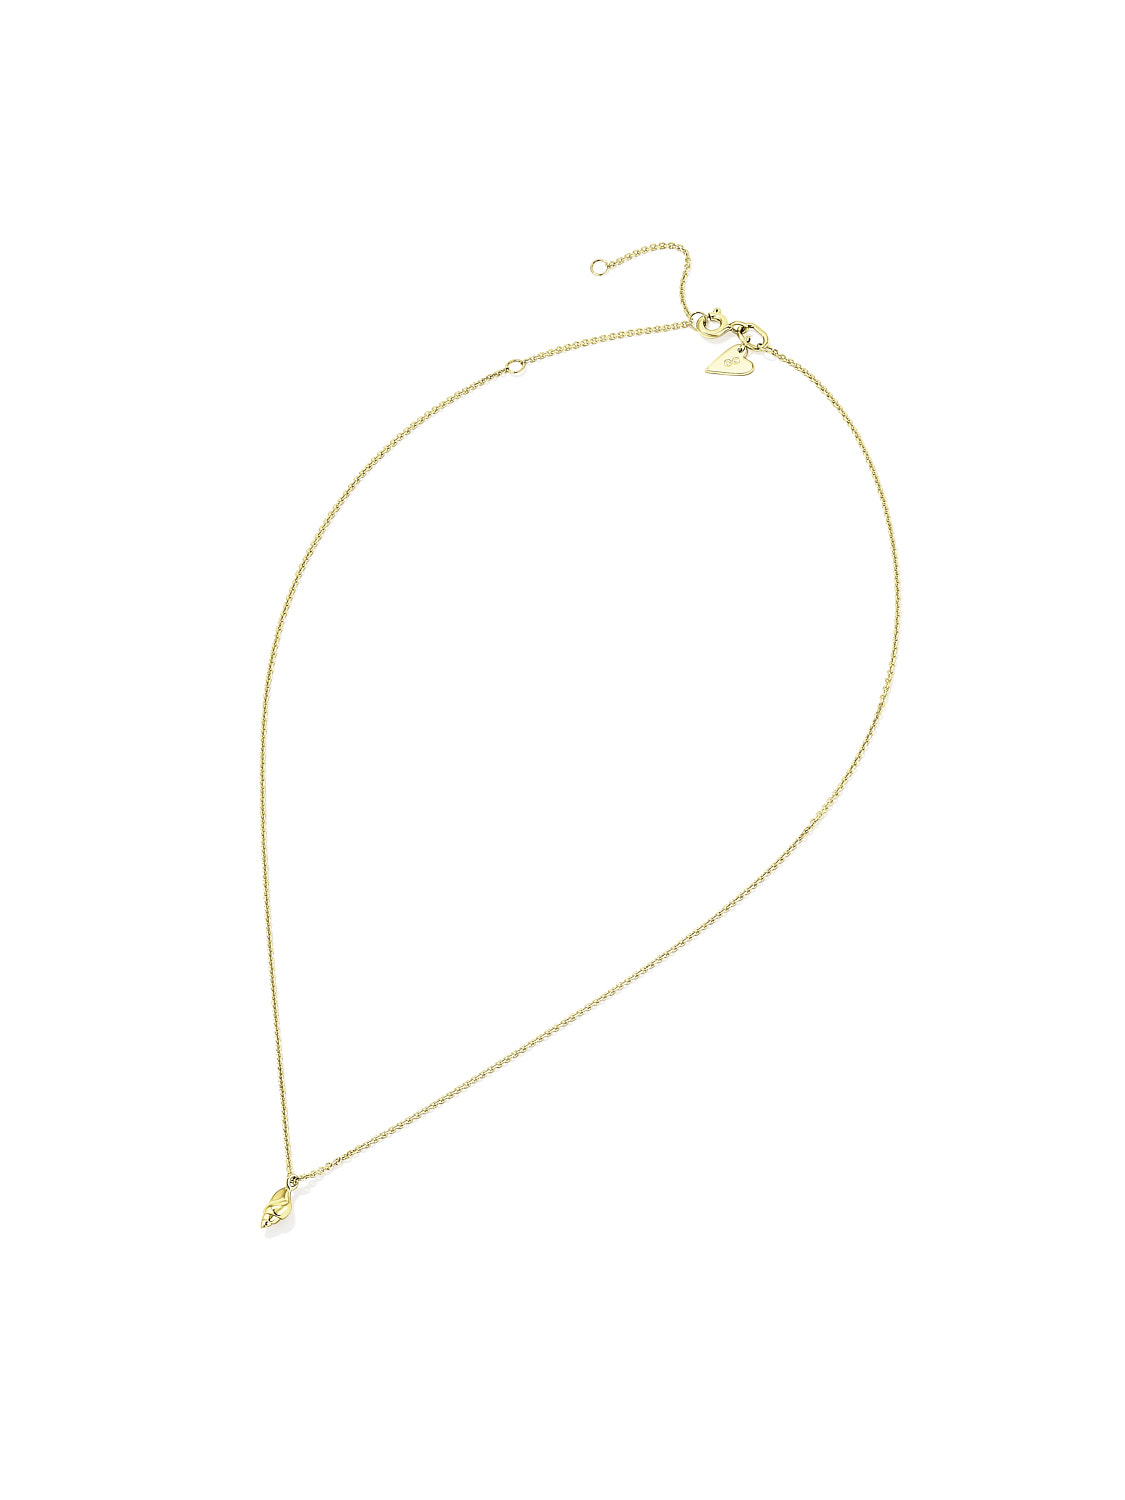 TULIP SHELL NECKLACE YELLOW GOLD  